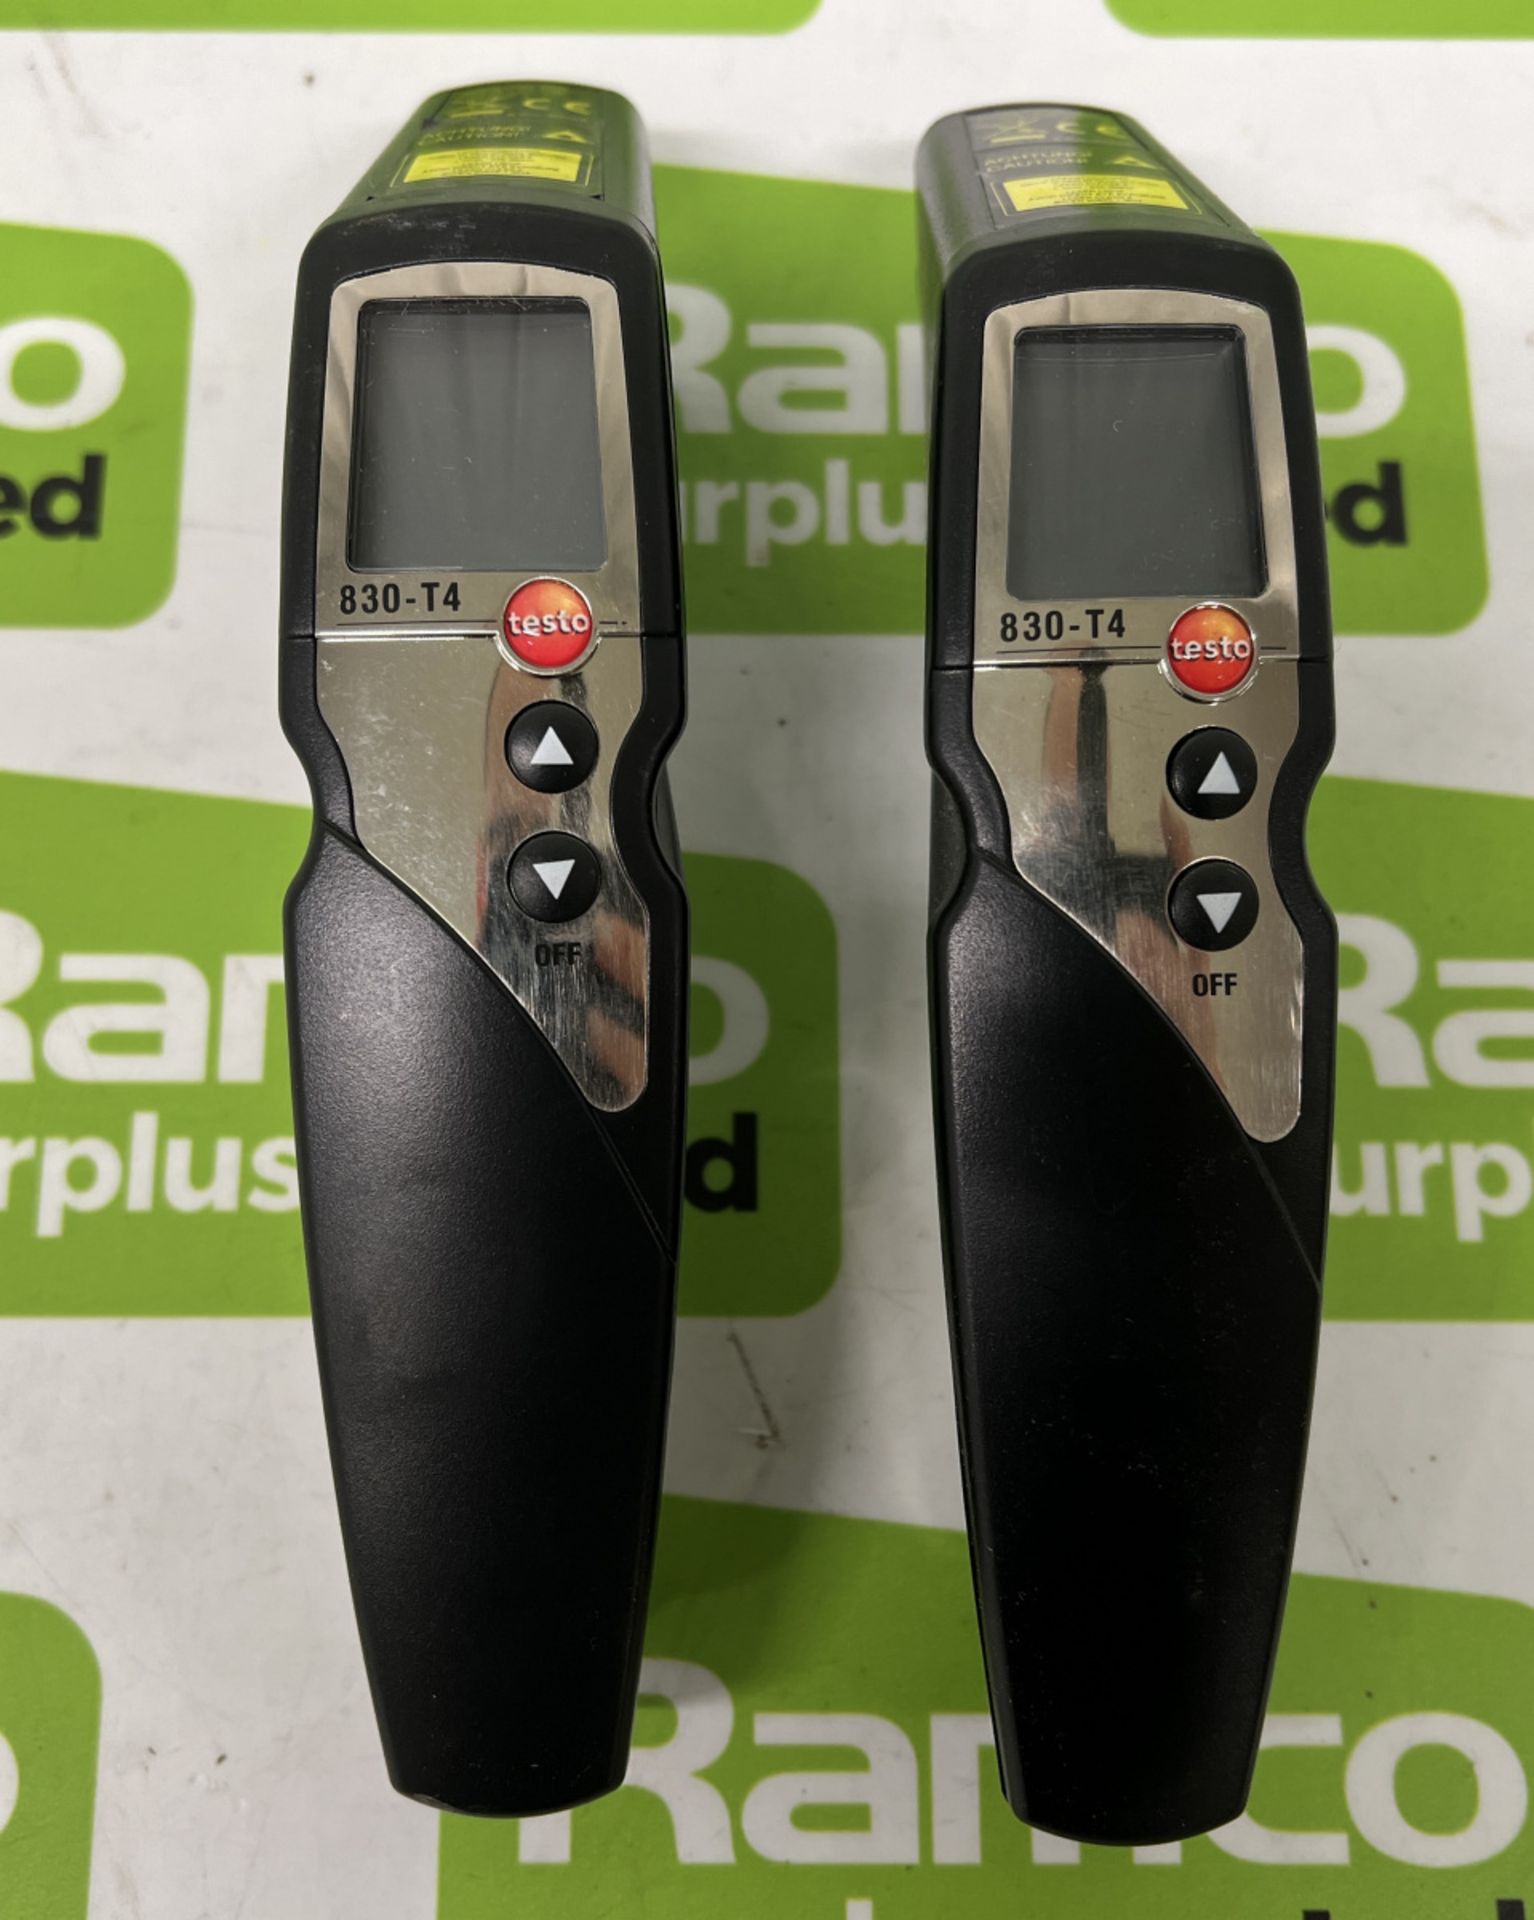 2x Testo 830-T4 infrared thermometers - Image 2 of 4